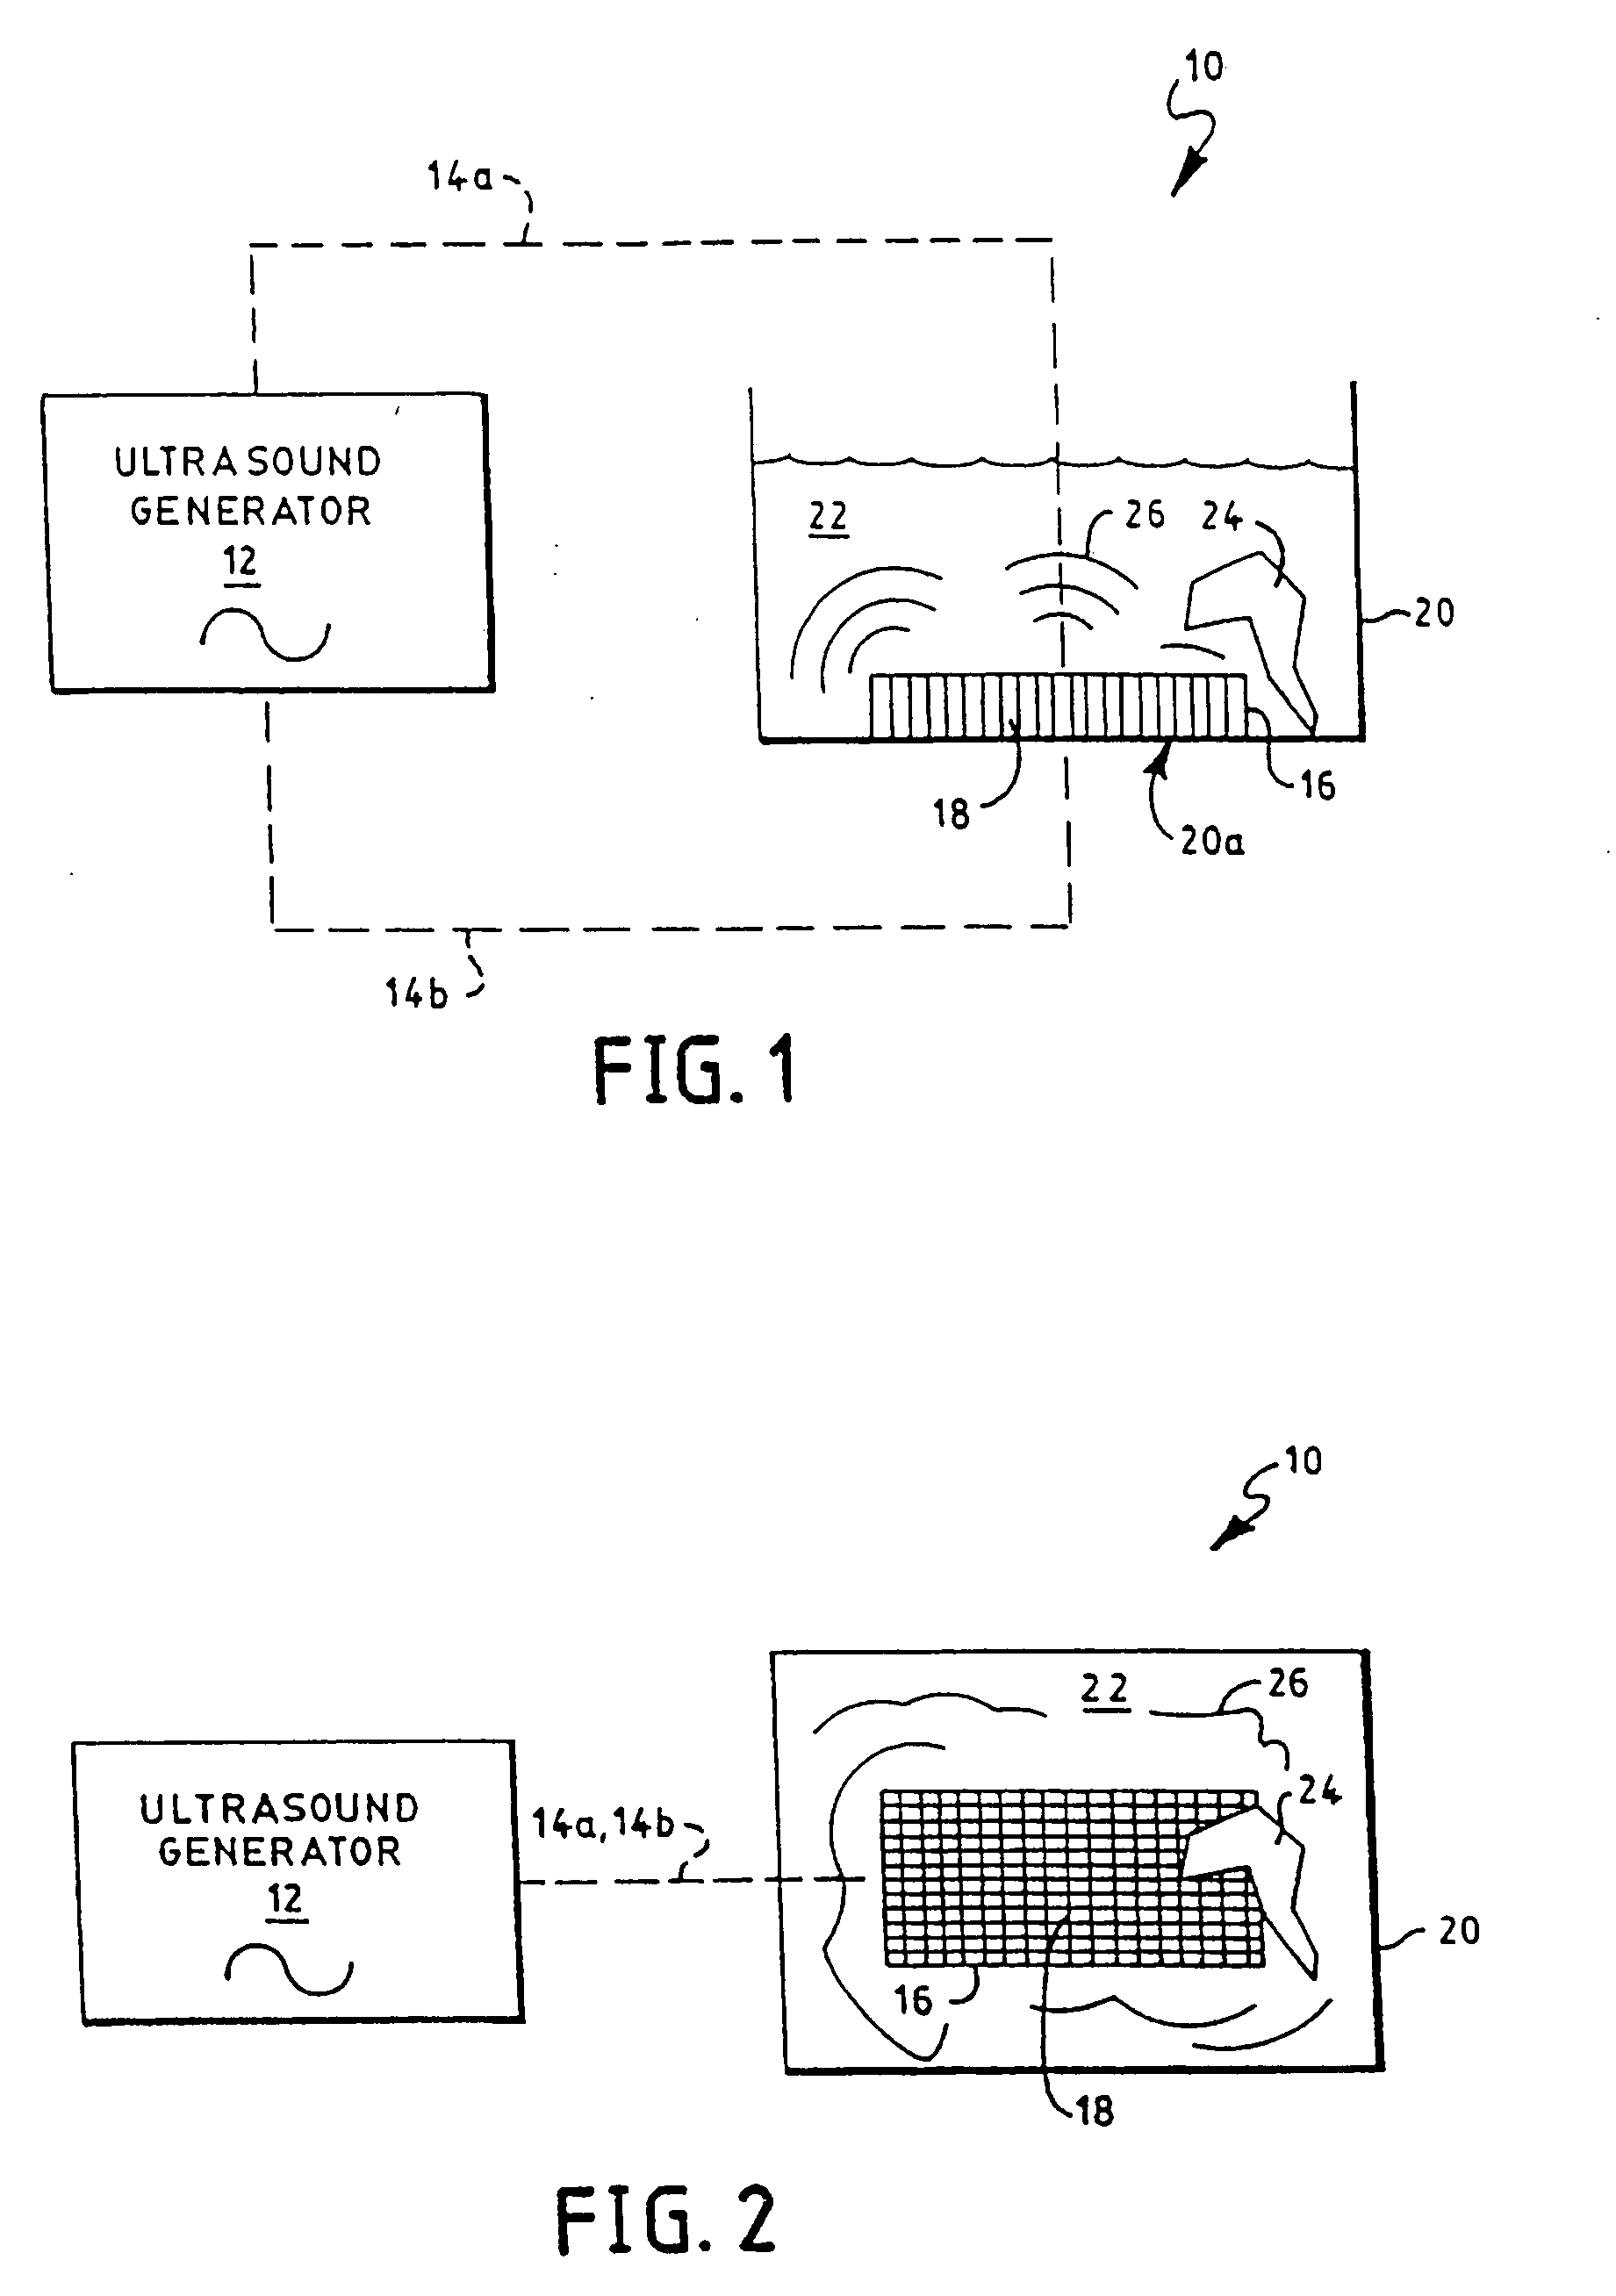 Apparatus, circuitry, signals, probes and methods for cleaning and/or processing with sound